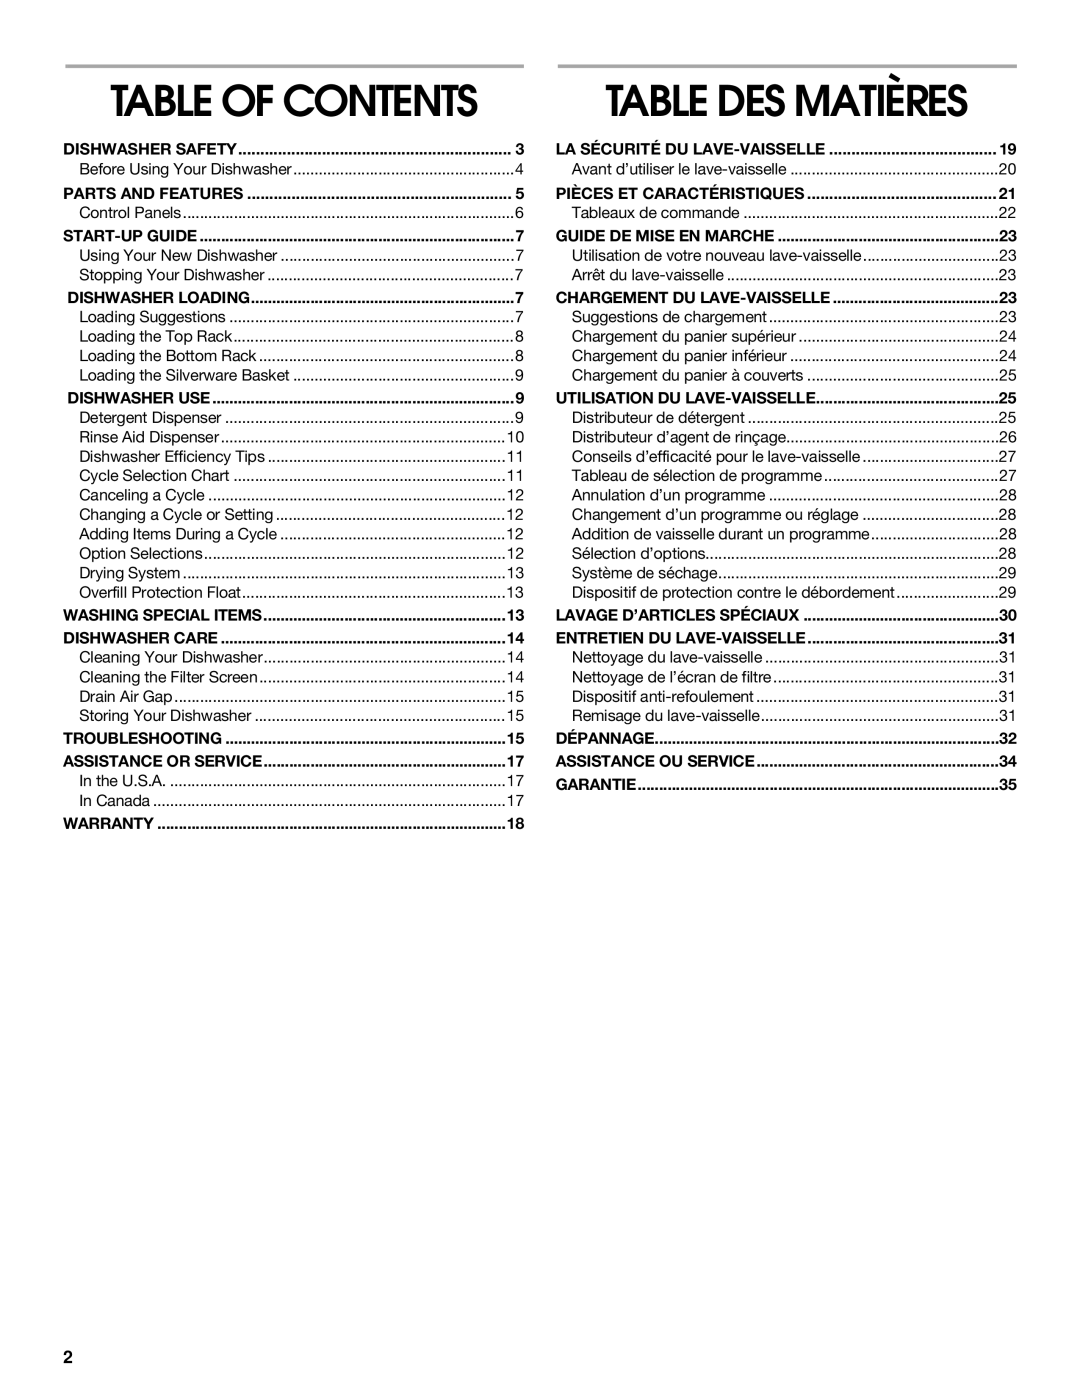 Whirlpool RUD5750, RUD5000, RUD3000 manual Table Des Matières, Table Of Contents 